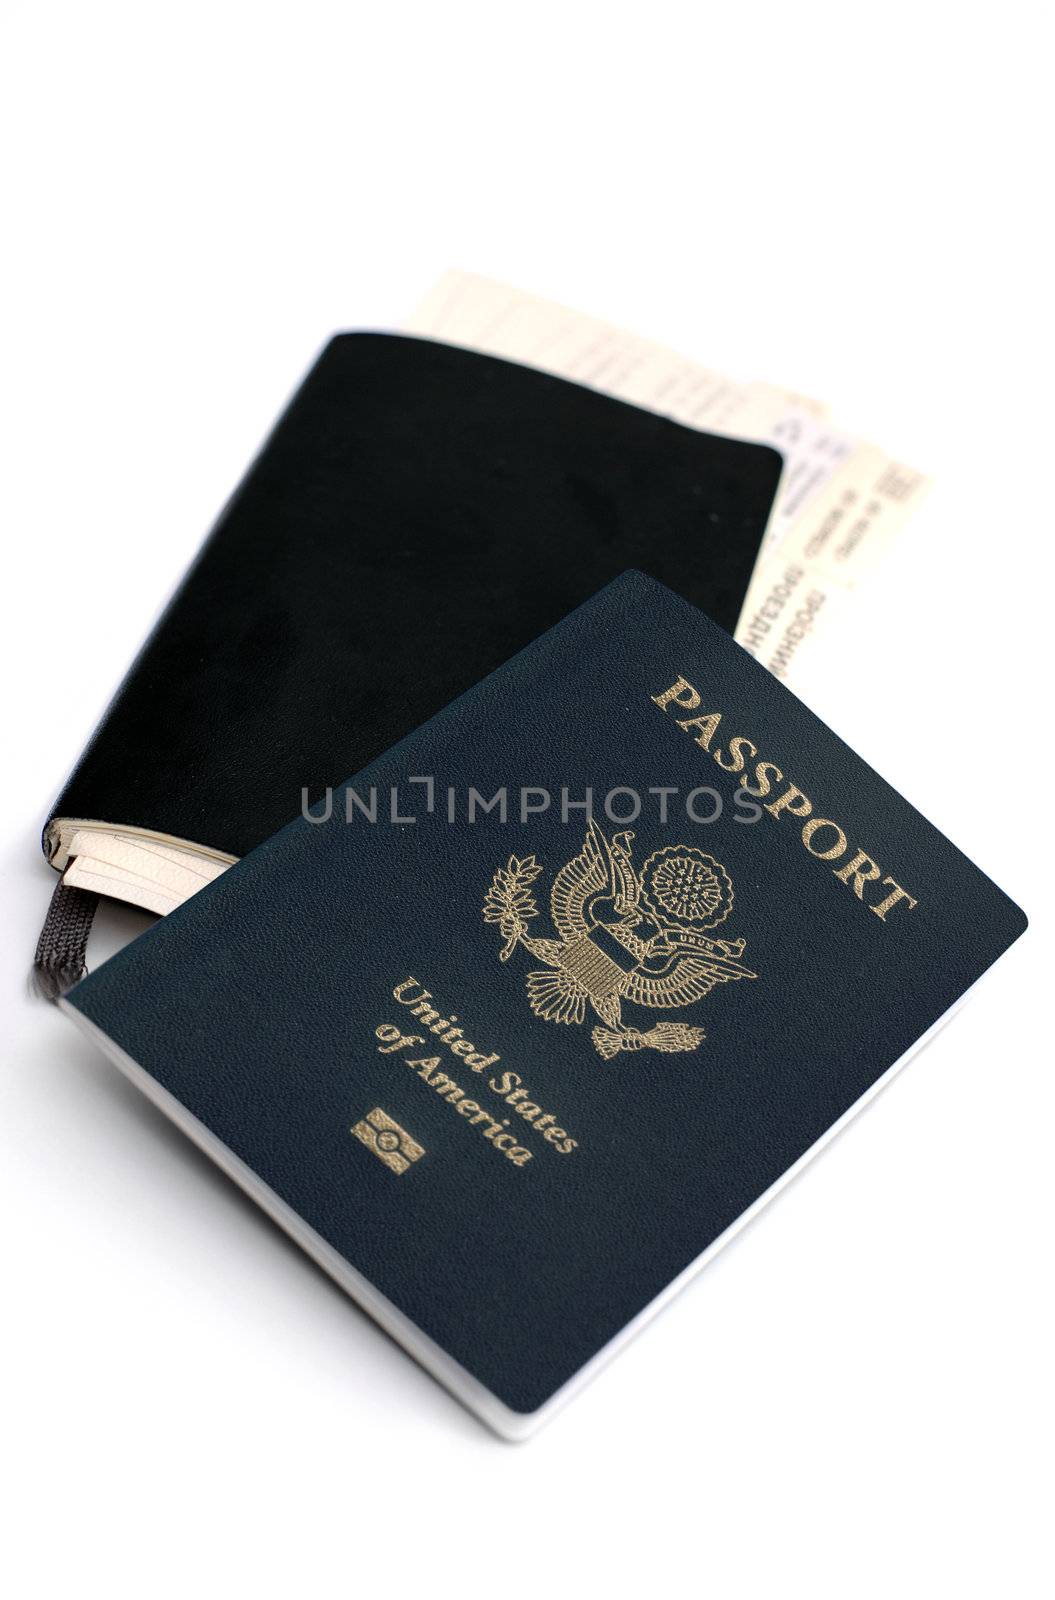 An image of a passport and a notebook on the table